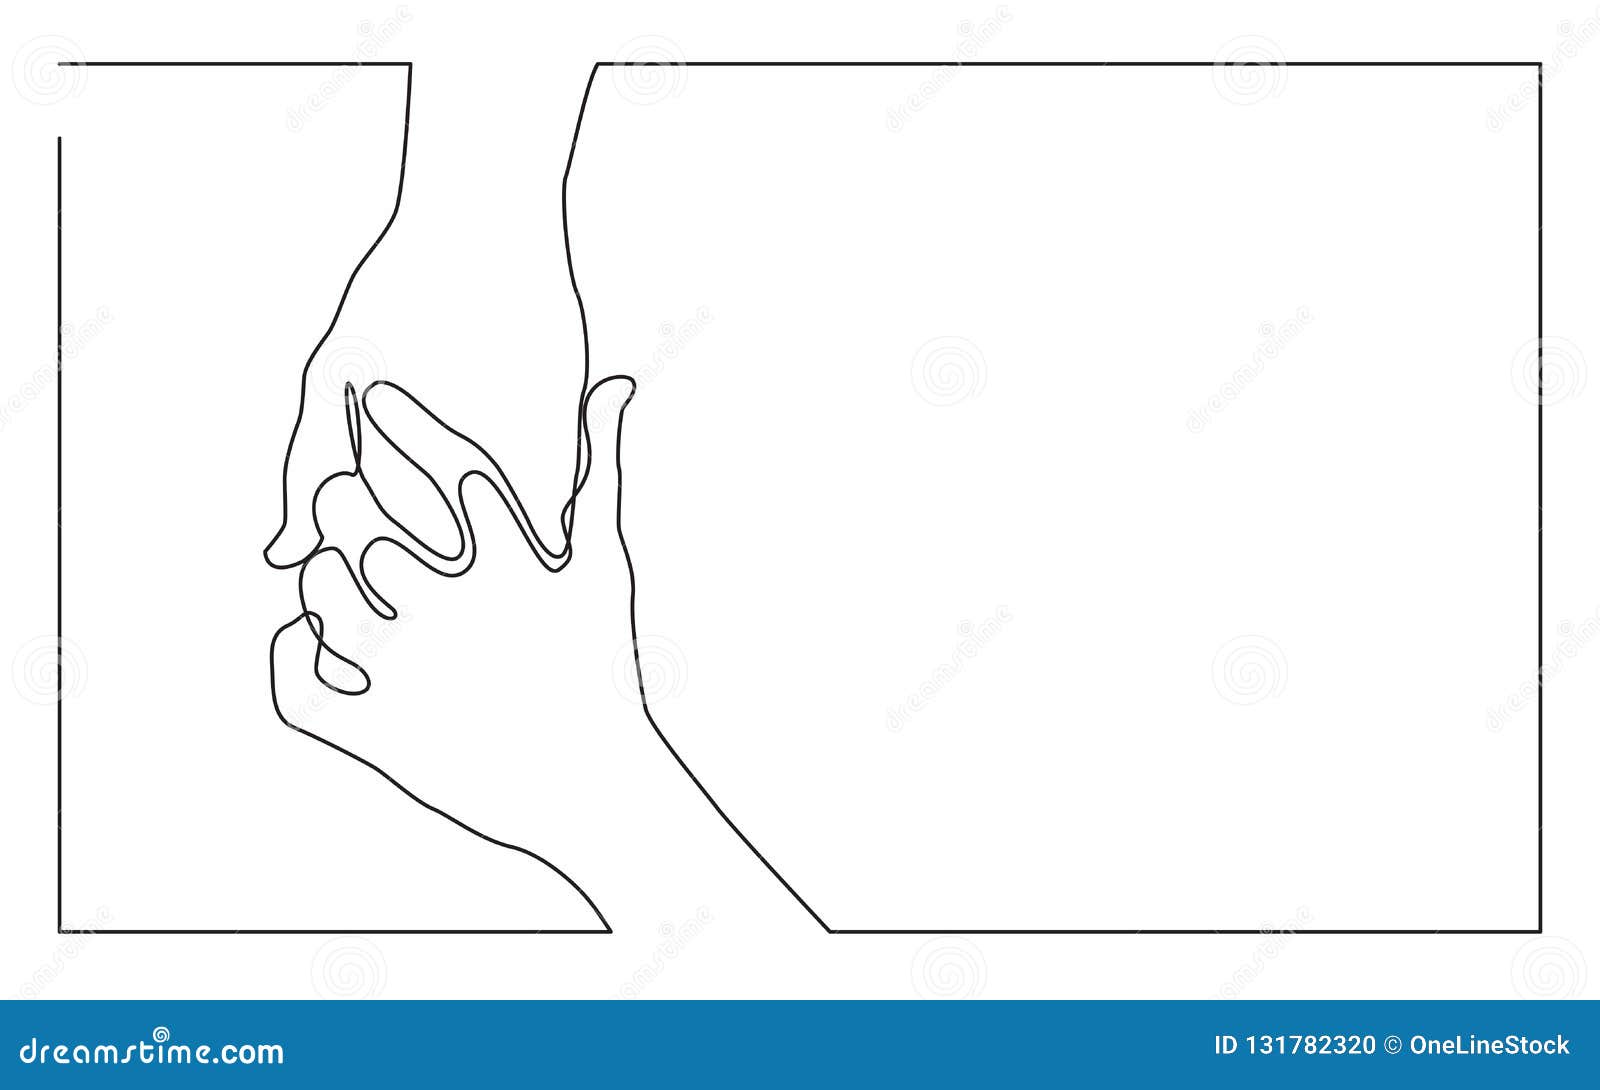 Continuous Line Drawing Of Two Hands Touching Each Other Stock